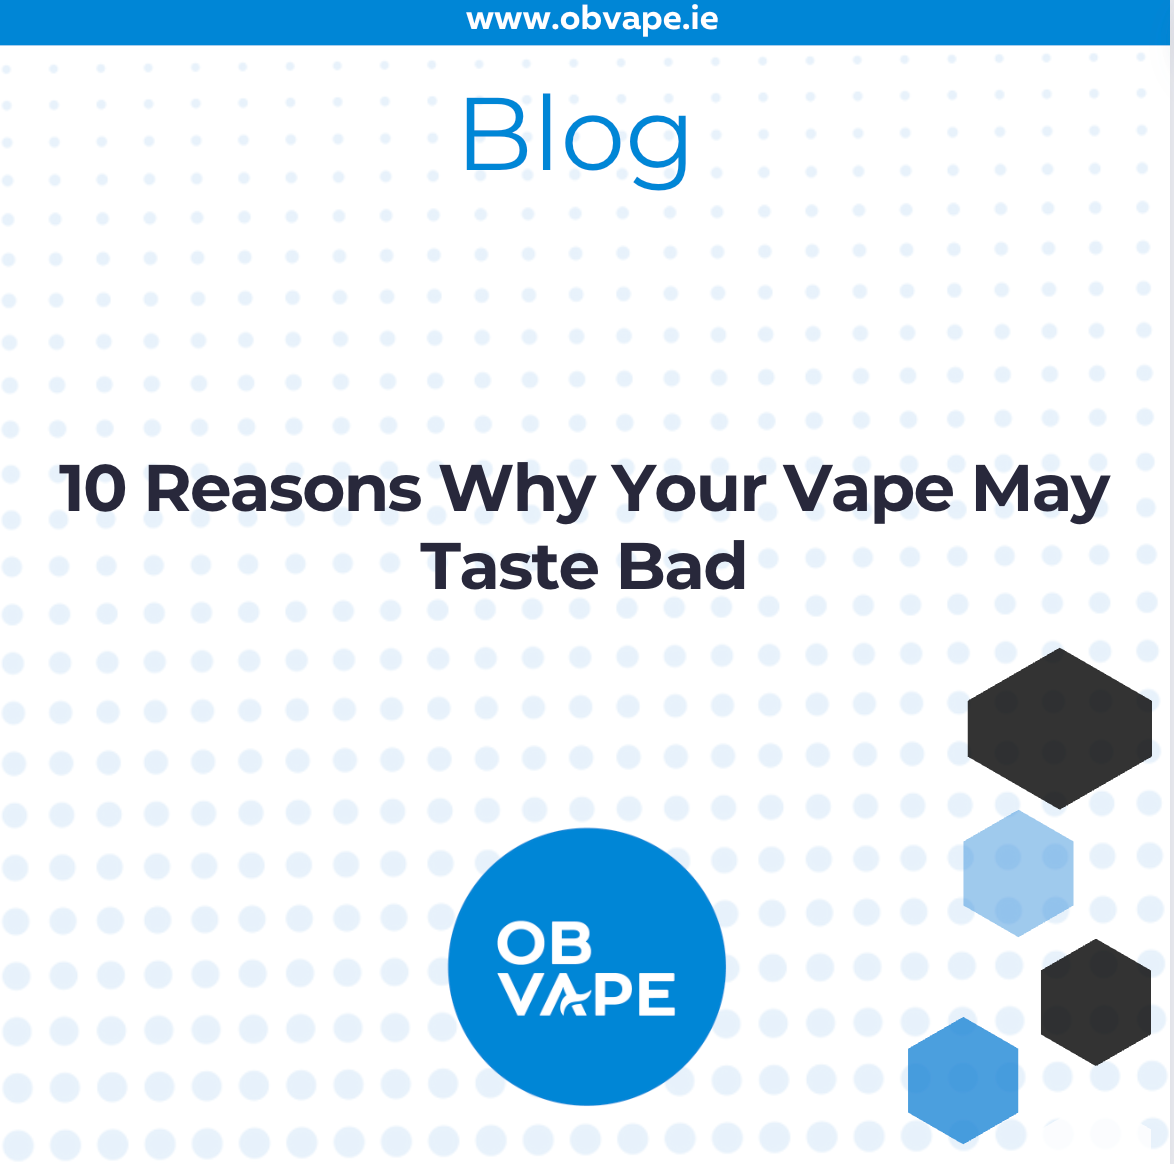 10 Reasons Why Your Vape May Taste Bad